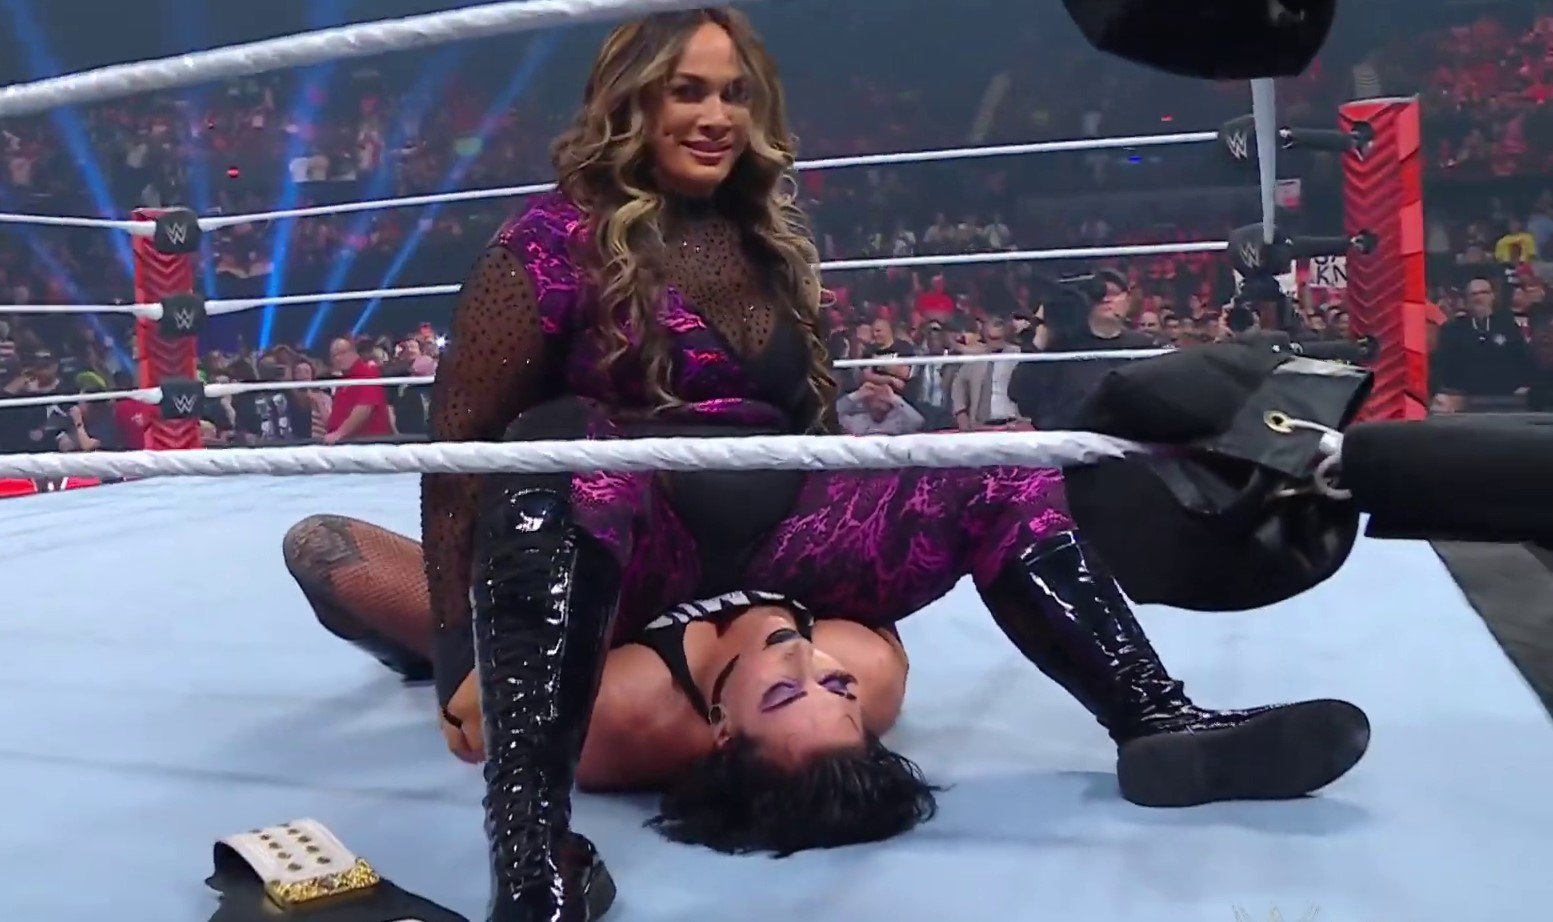 VIDEO: What Happened With Nia Jax & Rhea Ripley After WWE Raw